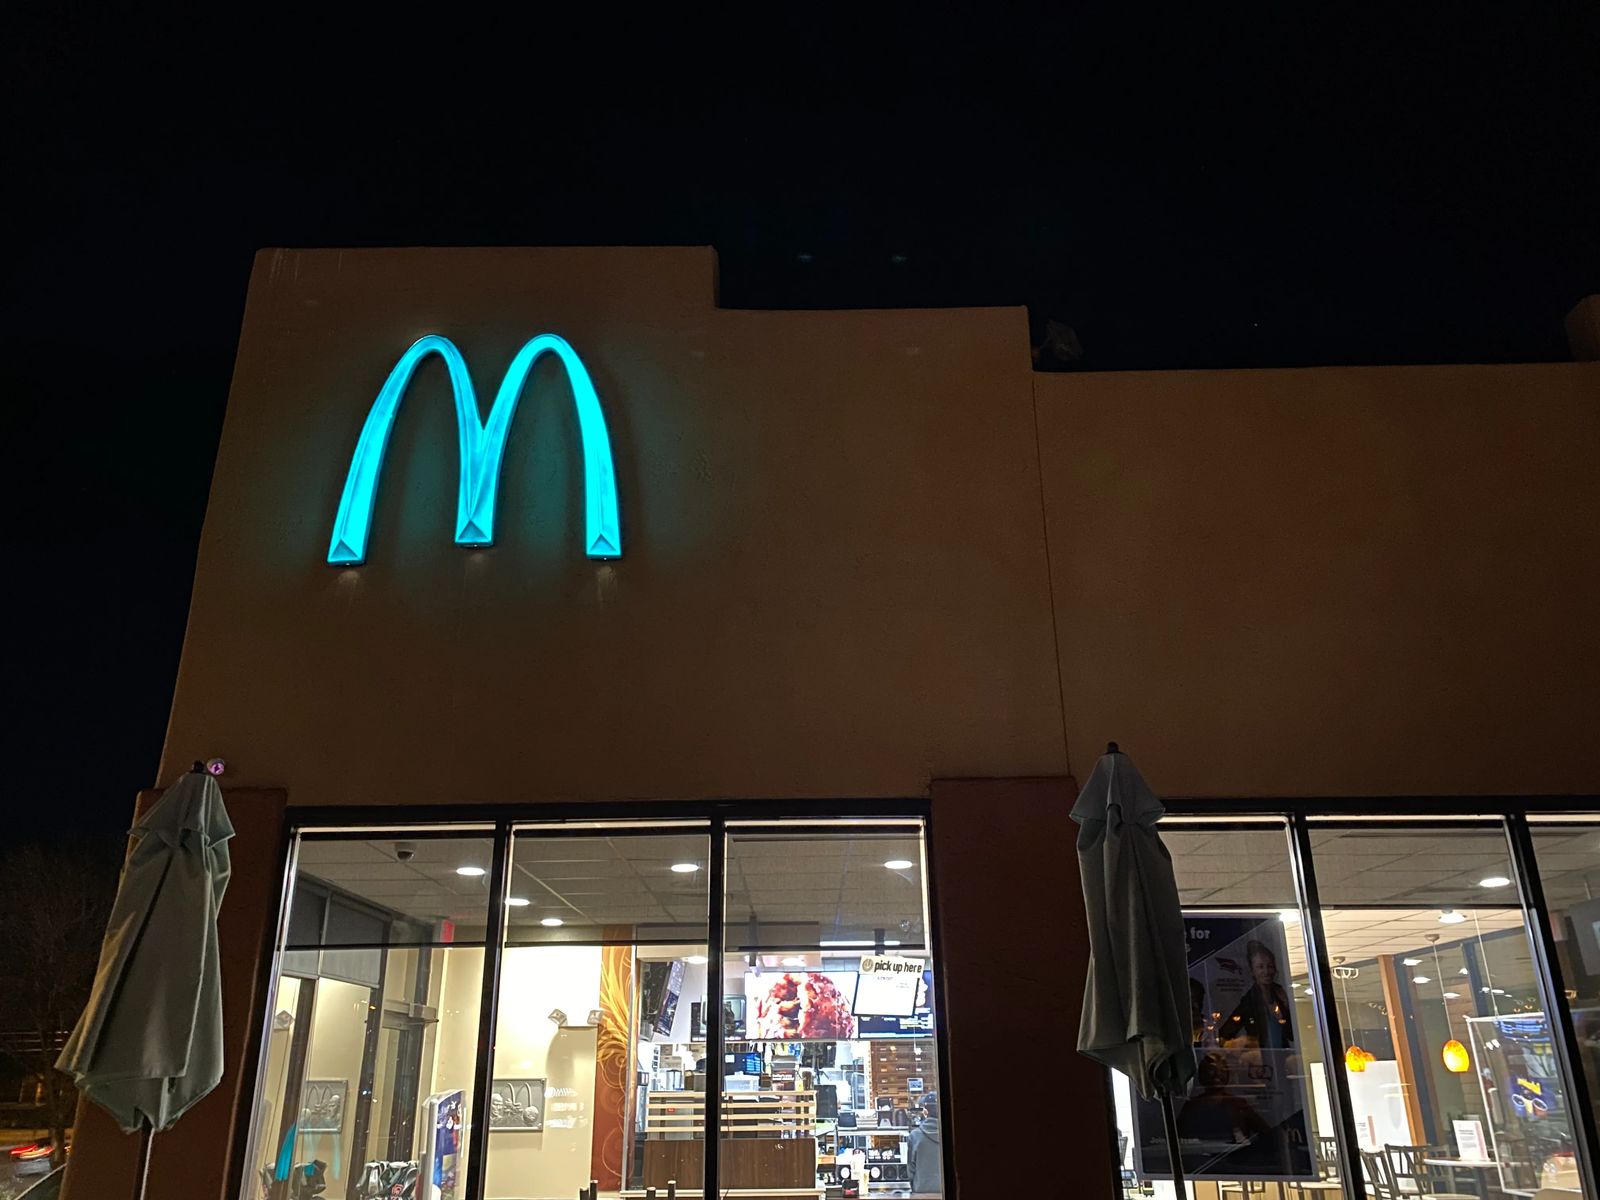 McDonald's with Green Arches - Things to do in Sedona